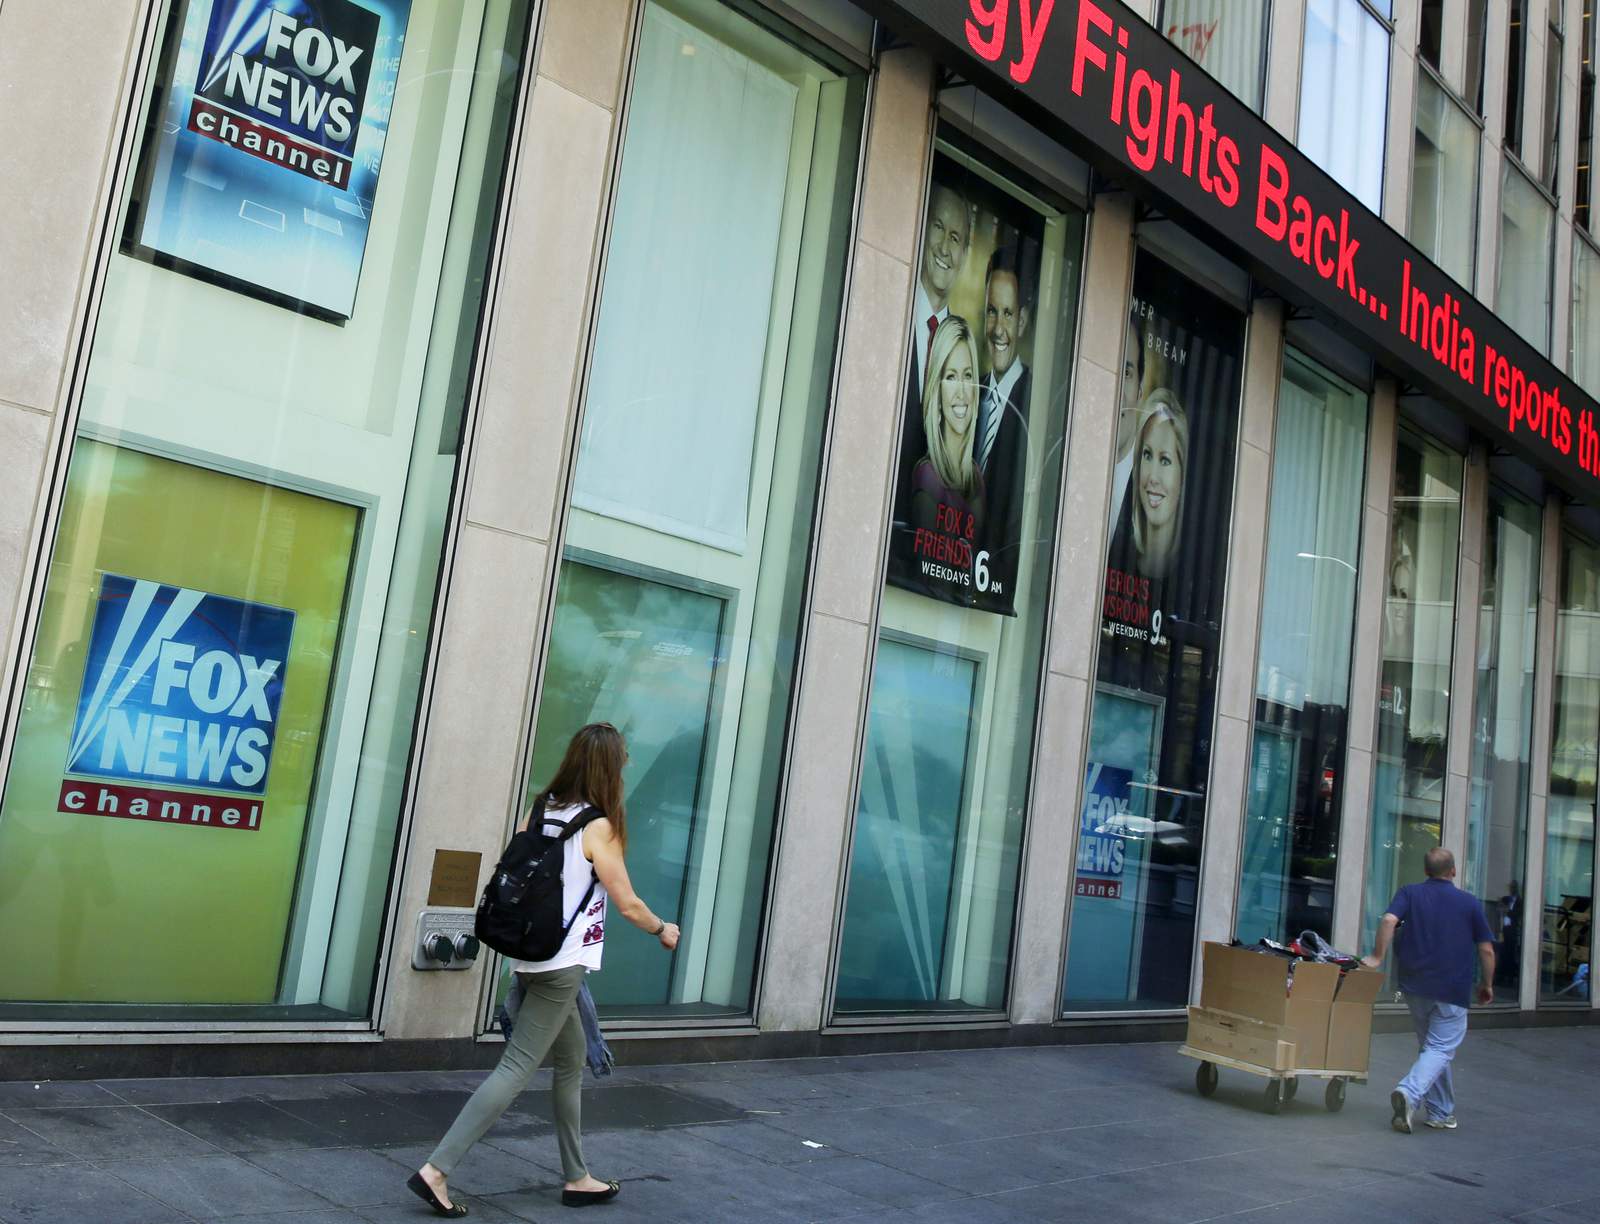 Pressure mounts, rifts emerge at Fox News over election